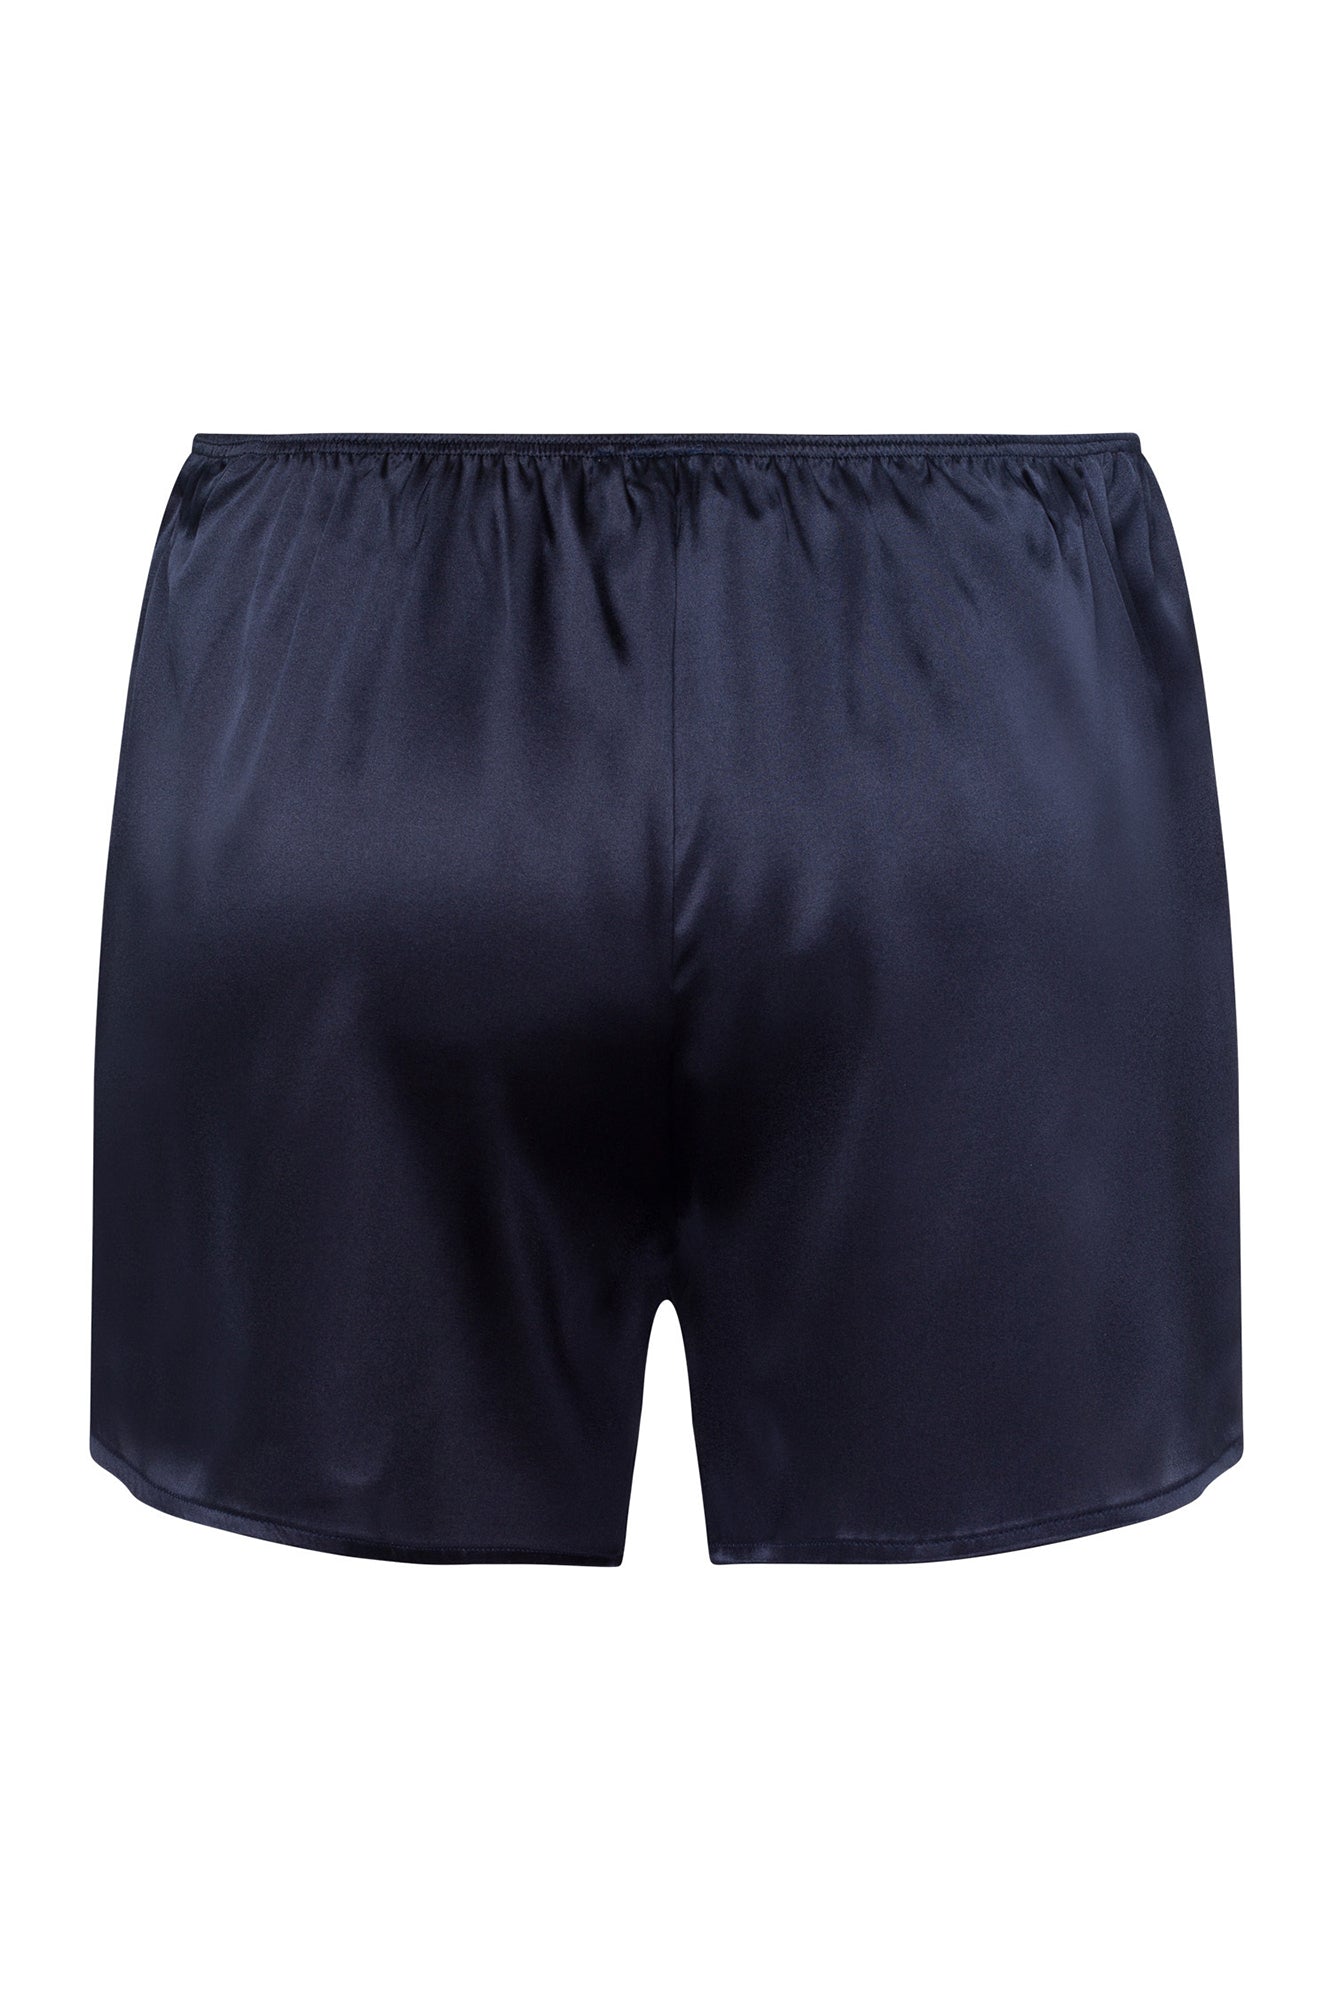 The Grand Central Knickers By HANRO In Deep Navy